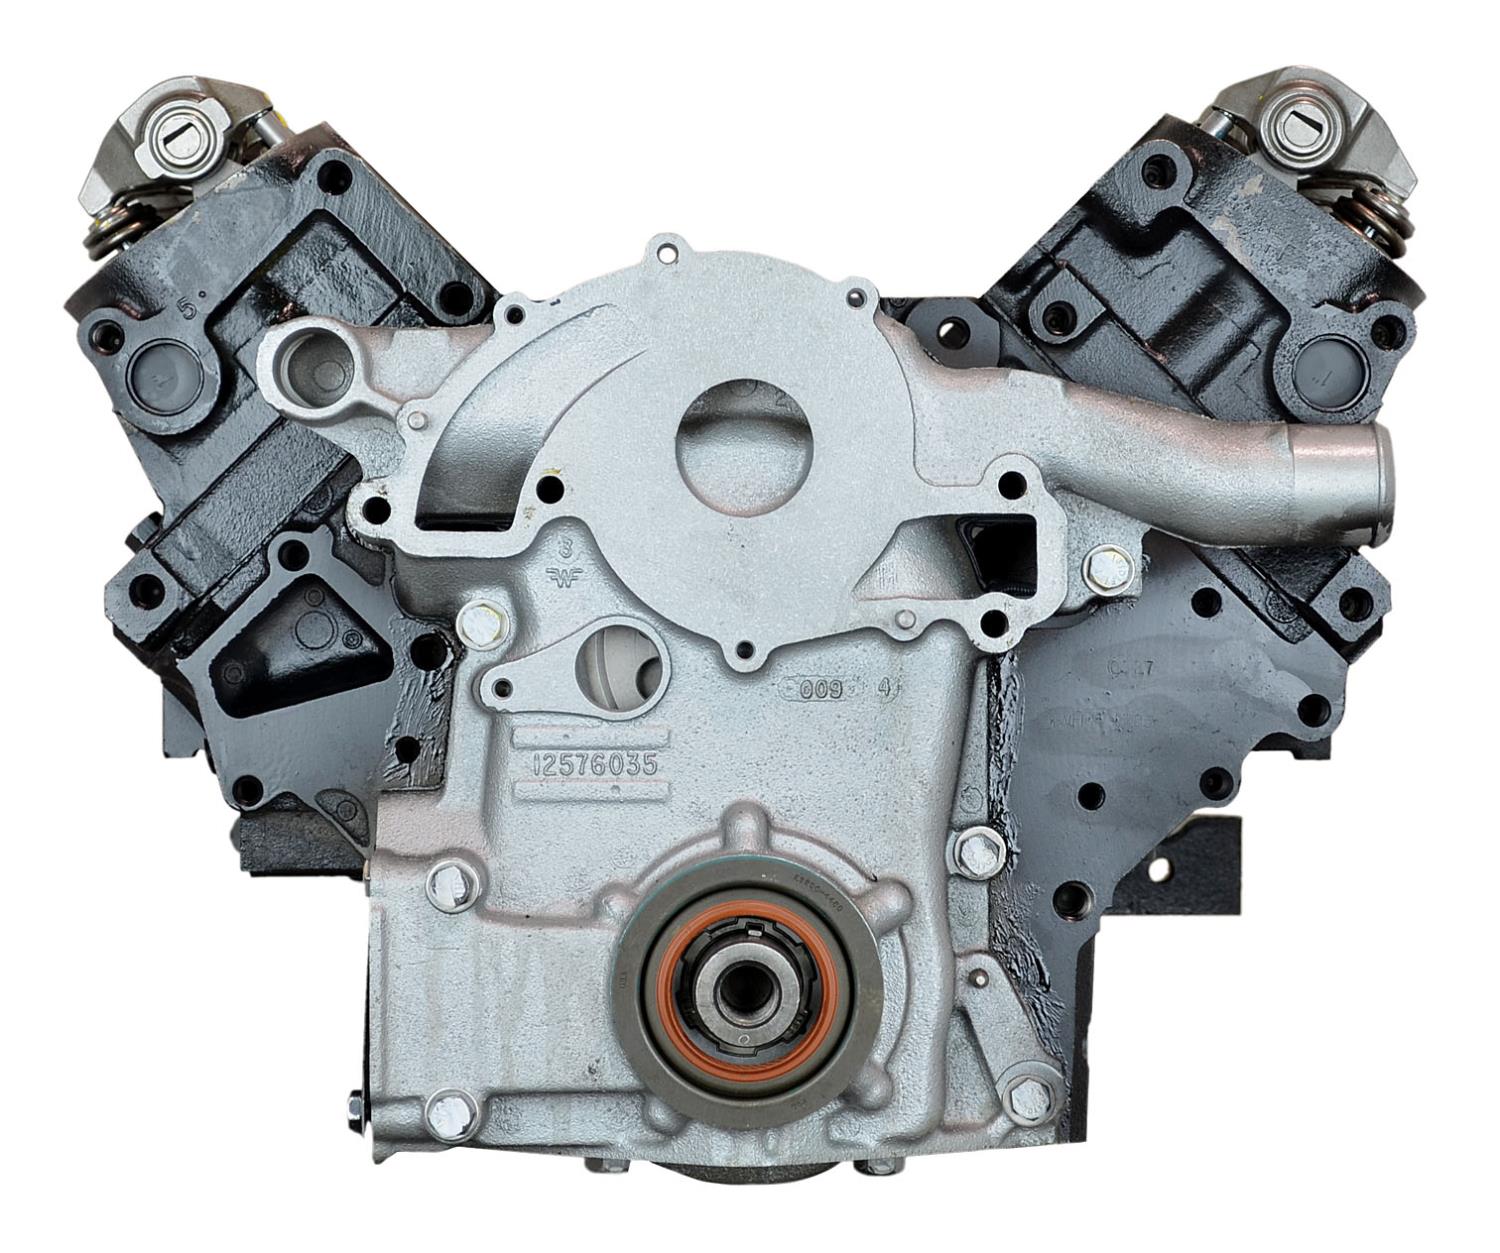 Remanufactured Crate Engine for 1997-2007